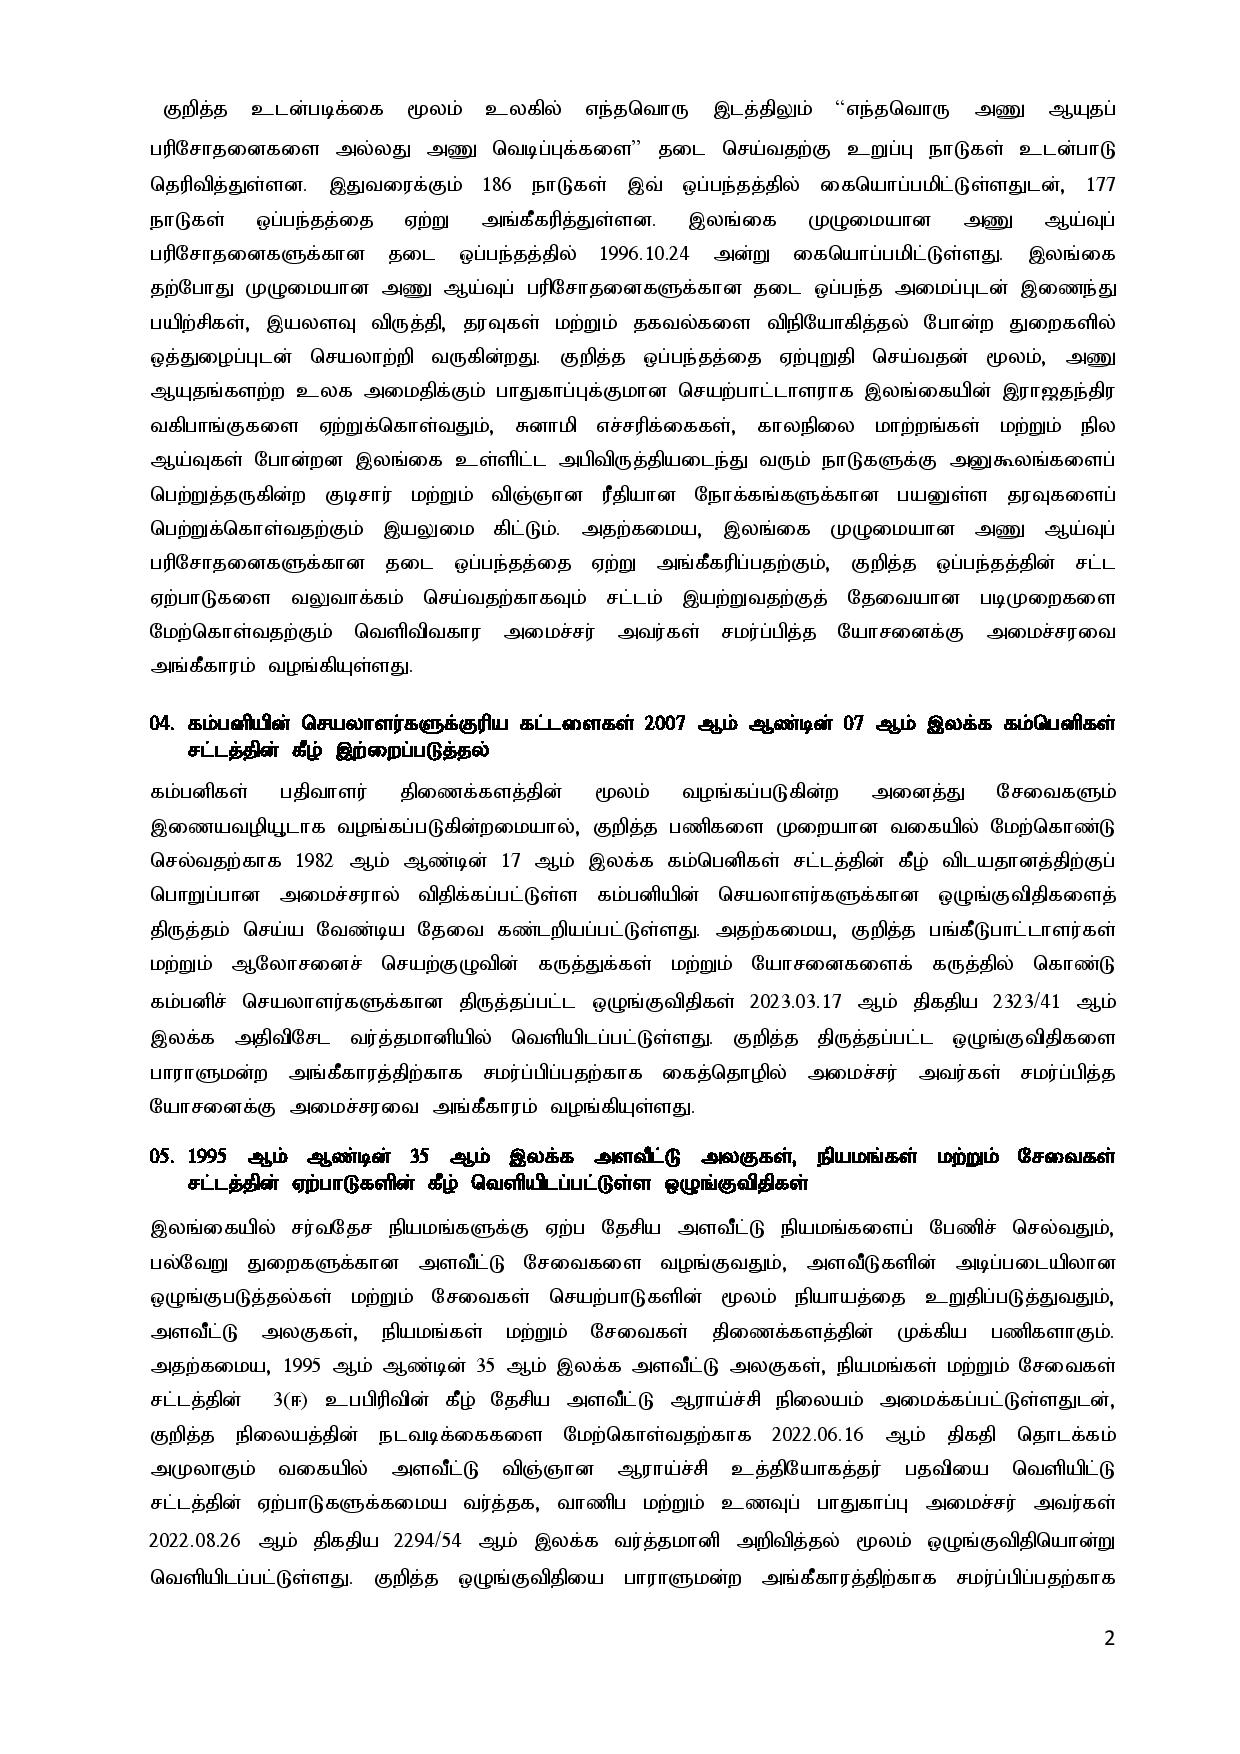 Cabinet Decisions on 05.06.2023 Tamil page 002